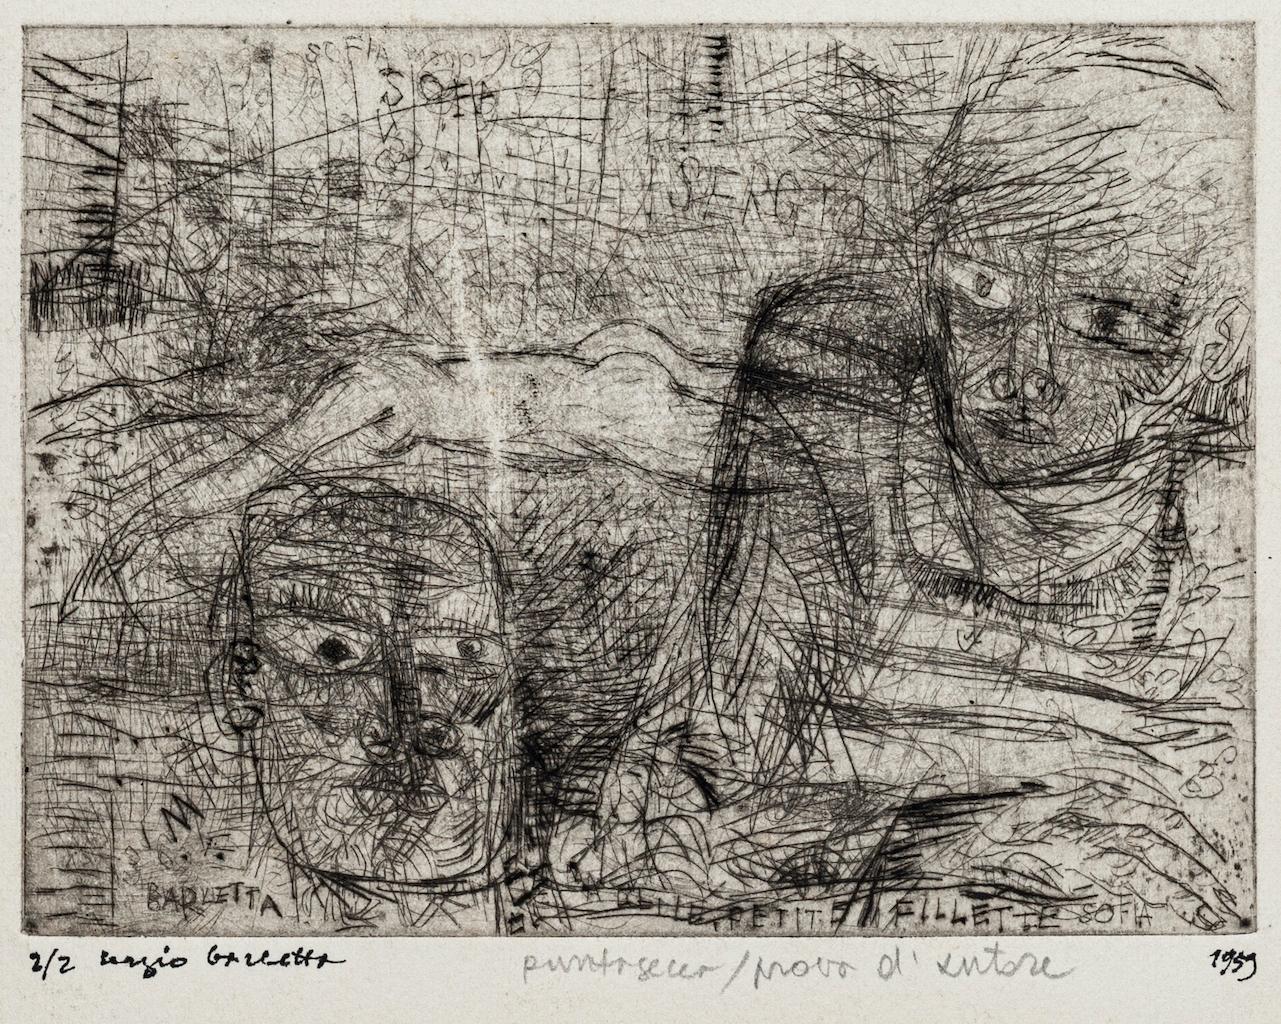 Figures is an original etching, realized by Sergio Barletta in 1959.

Hand-signed.

Numbered 2/2.

In good condition. 

Included a Passepartout: 34 x 49 cm.

Here the artwork represents several figures in different positions depicted with confident